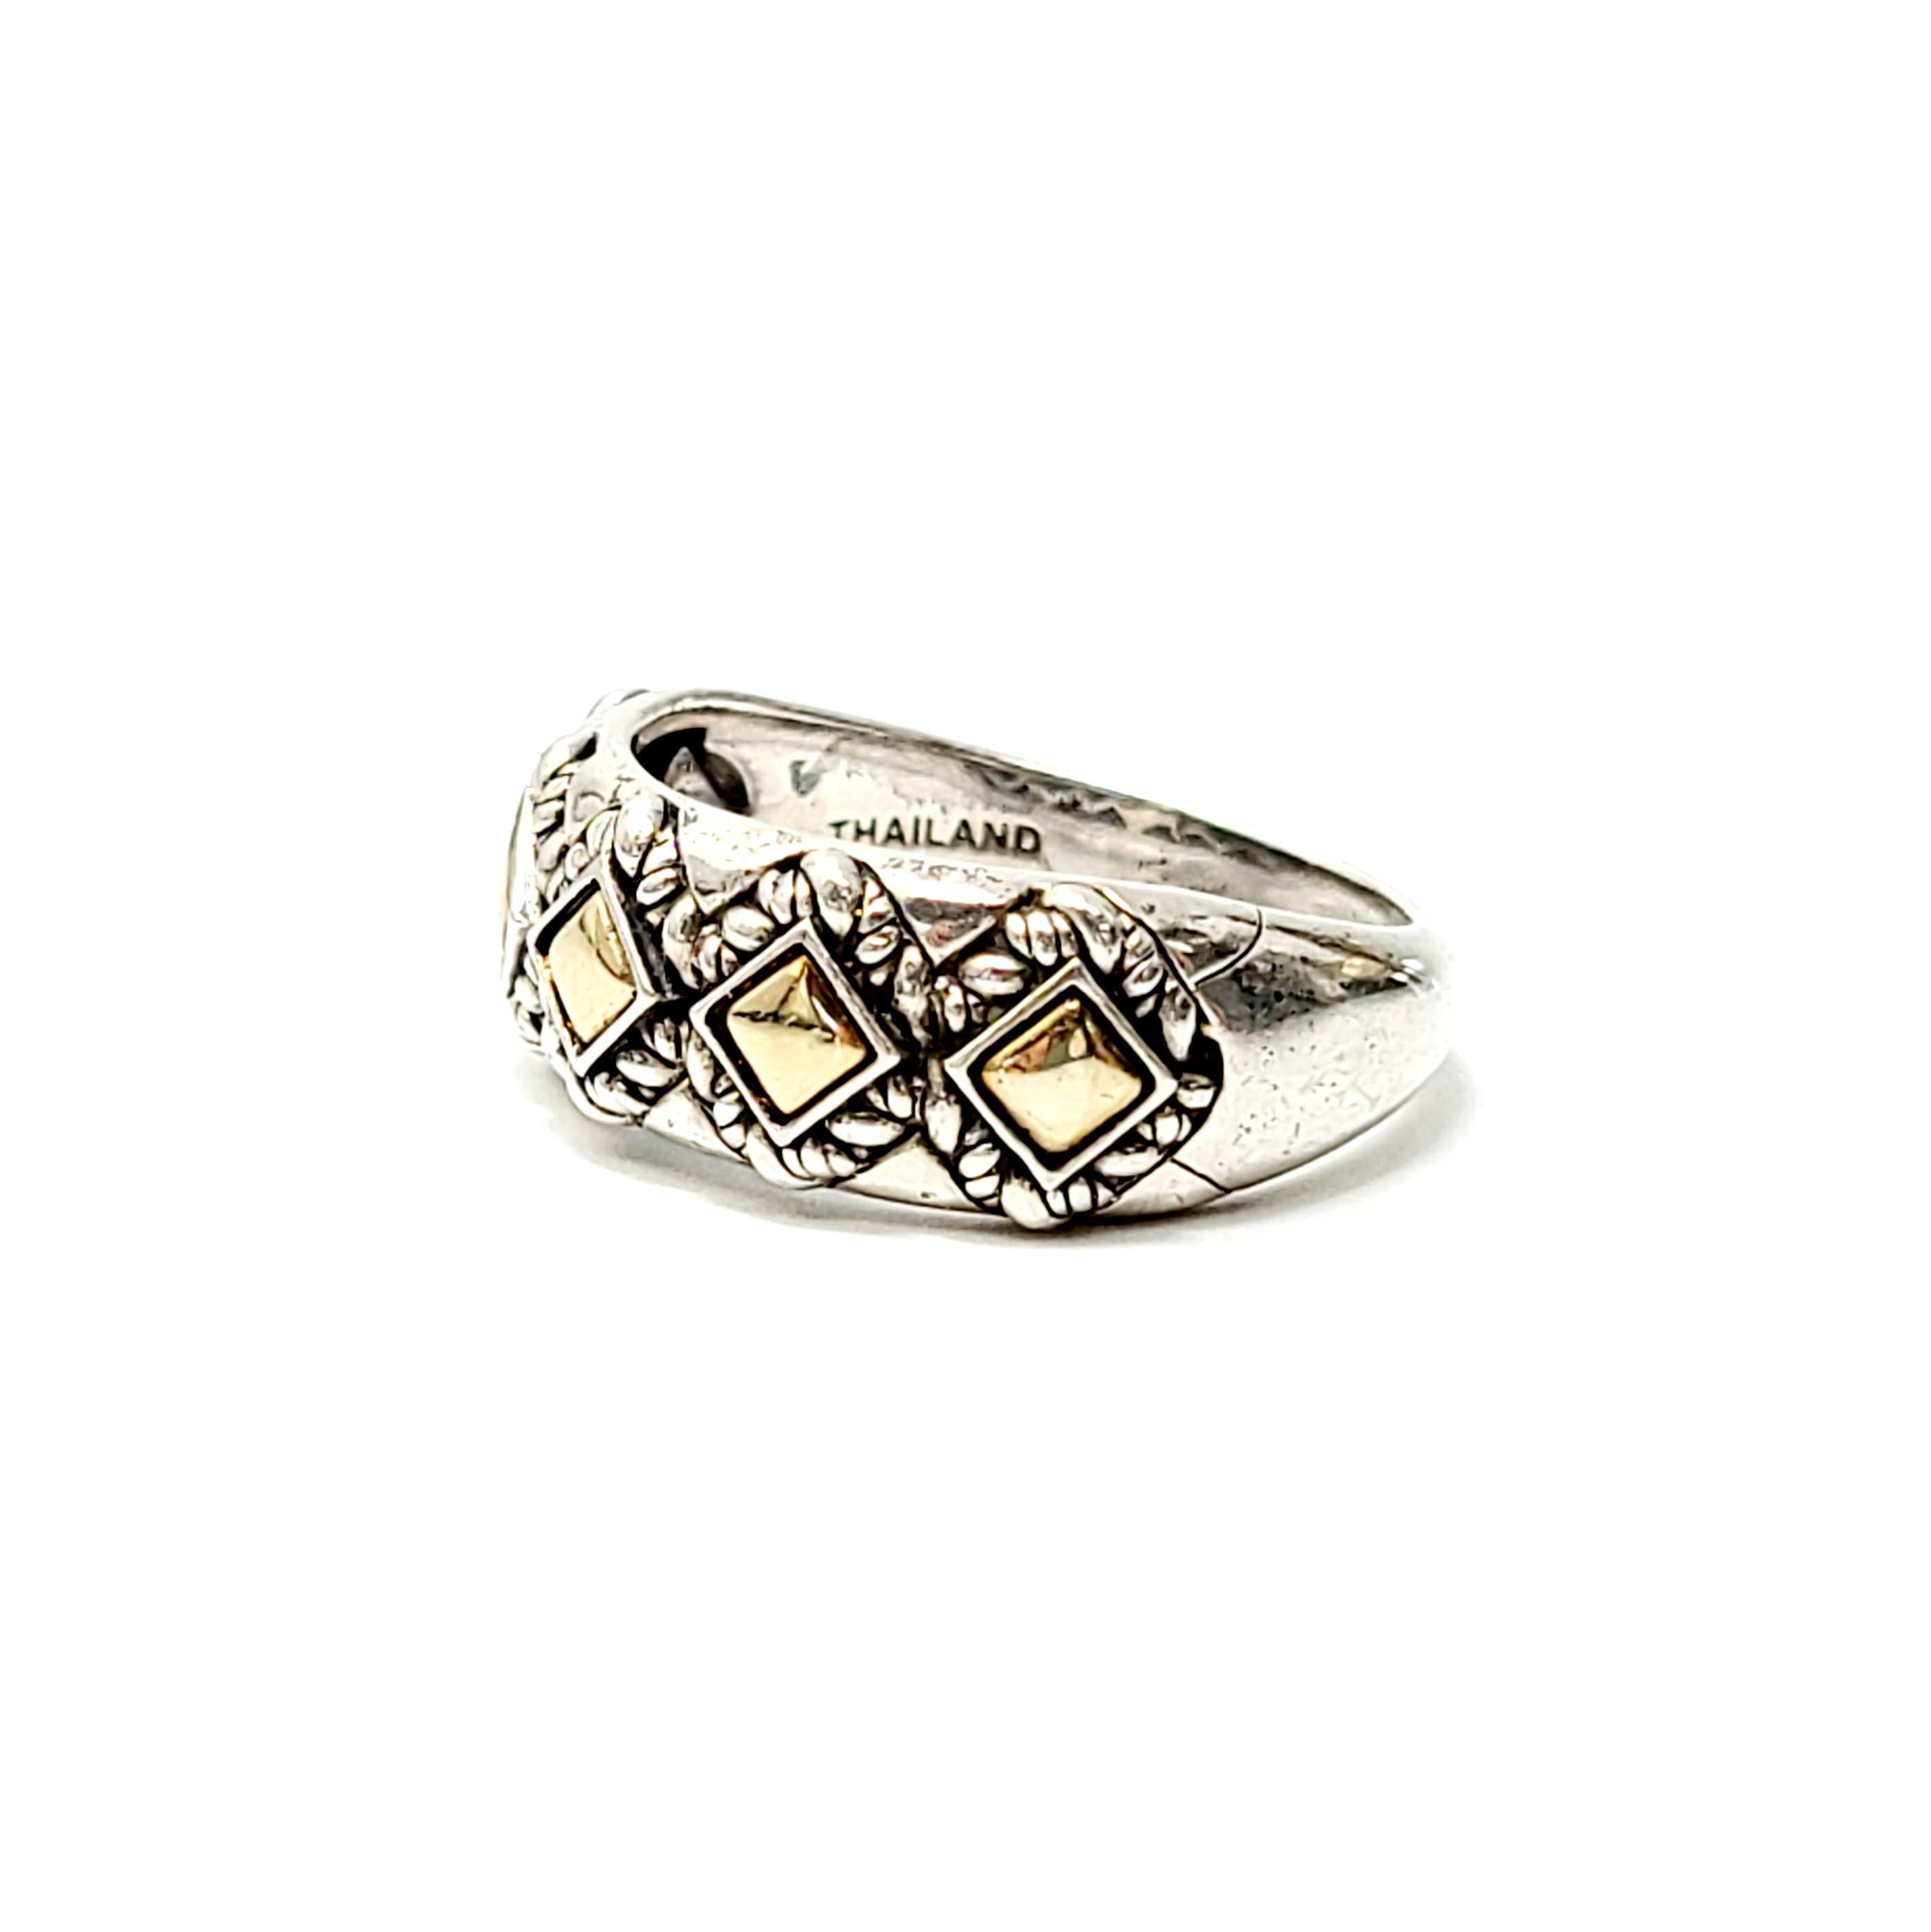 JAI by John Hardy sterling silver and 14K yellow gold ring.

Size 9

This beautiful sterling silver band with 14K yellow gold square accents is from the affordable line JAI by John Hardy for QVC featuring timeless Asian design.

Measures approx 8mm